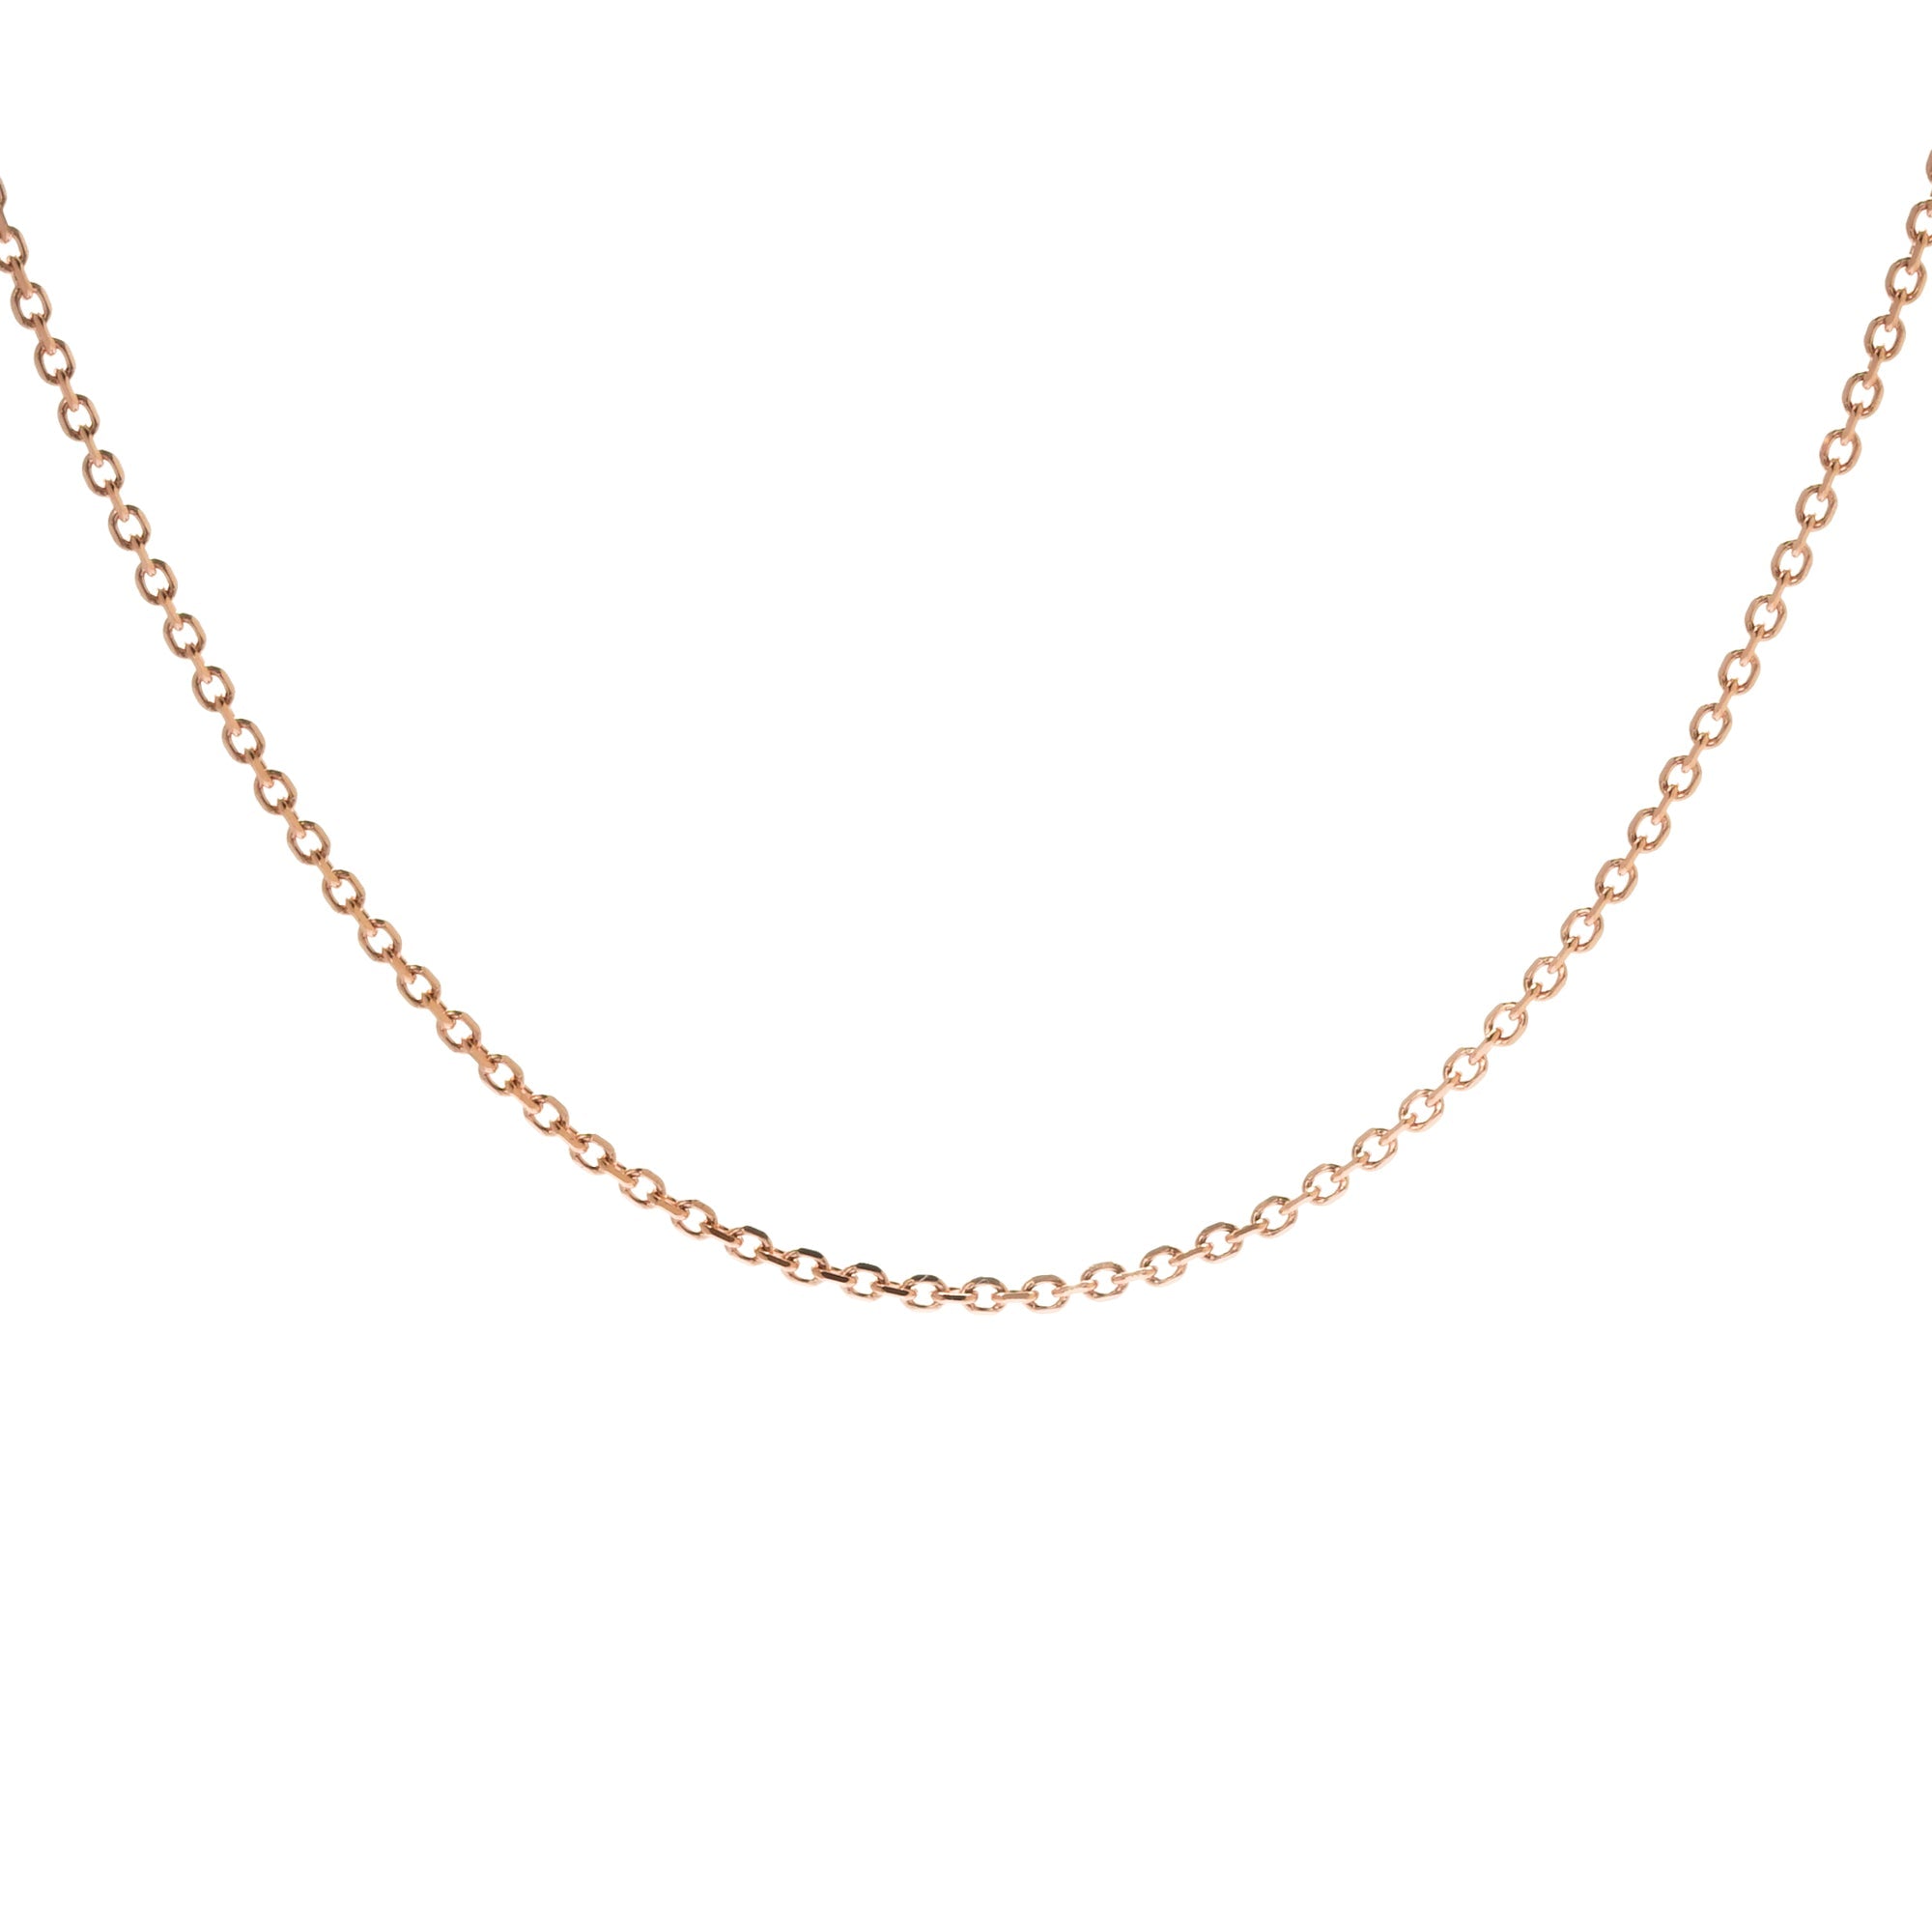 S Cable DC Ice 0.4 Gold Necklace - Juene Jewelry